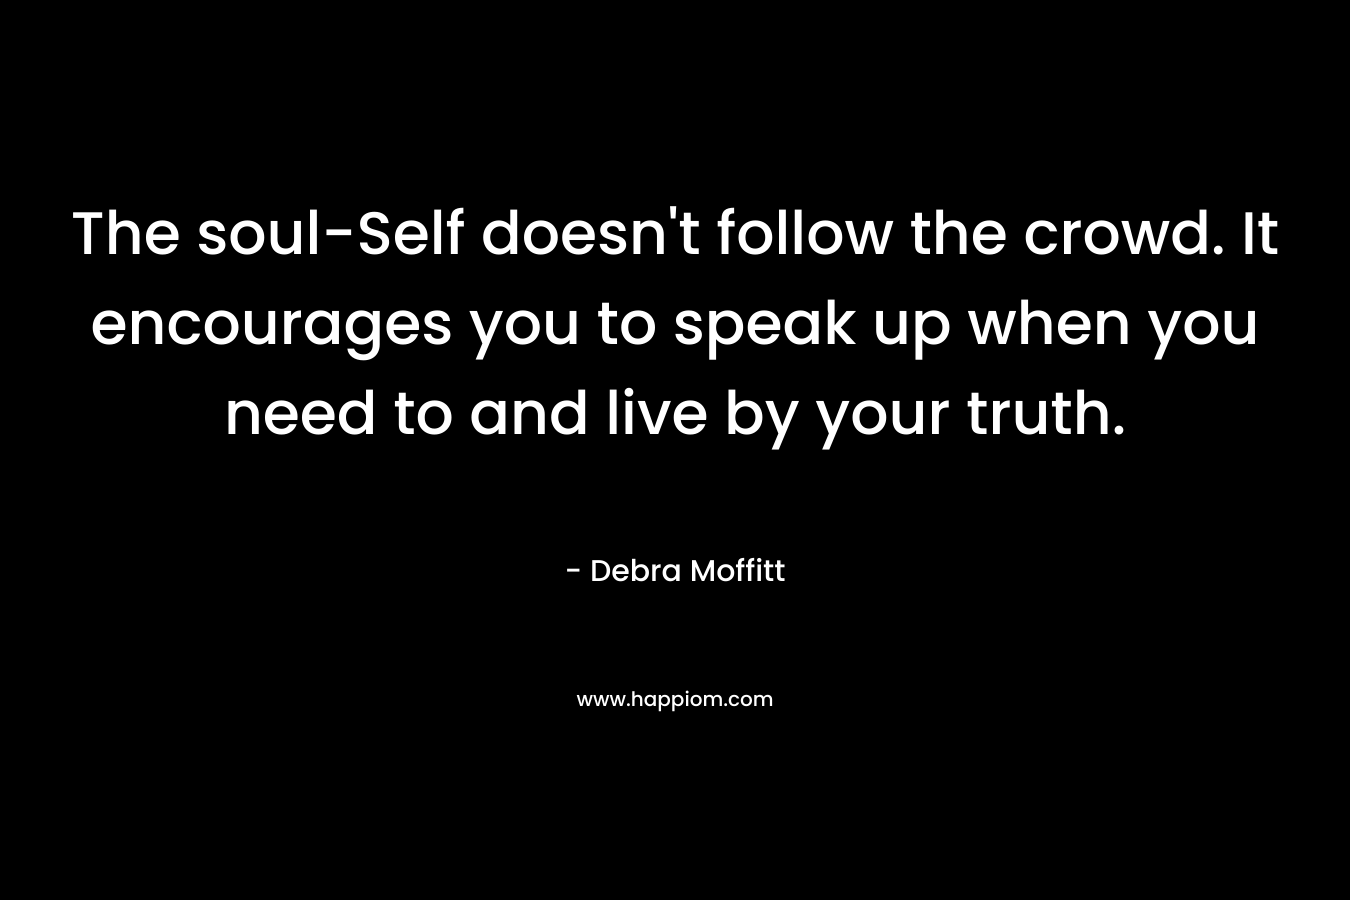 The soul-Self doesn’t follow the crowd. It encourages you to speak up when you need to and live by your truth. – Debra Moffitt